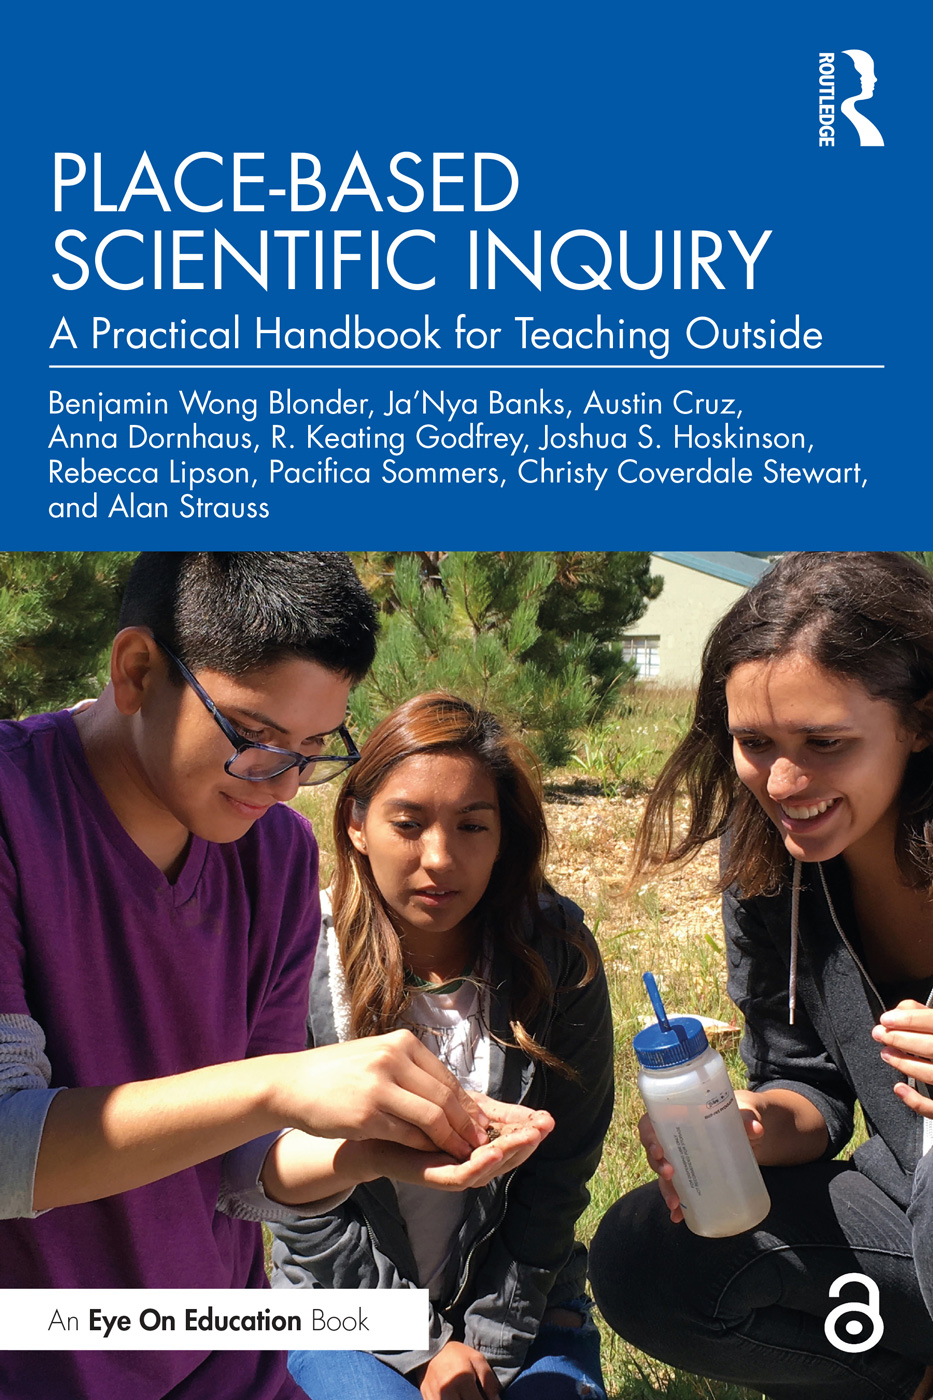 A photo of the textbook "Place-Based Scientific Inquiry: A Practical Handbook for Teaching Outside"